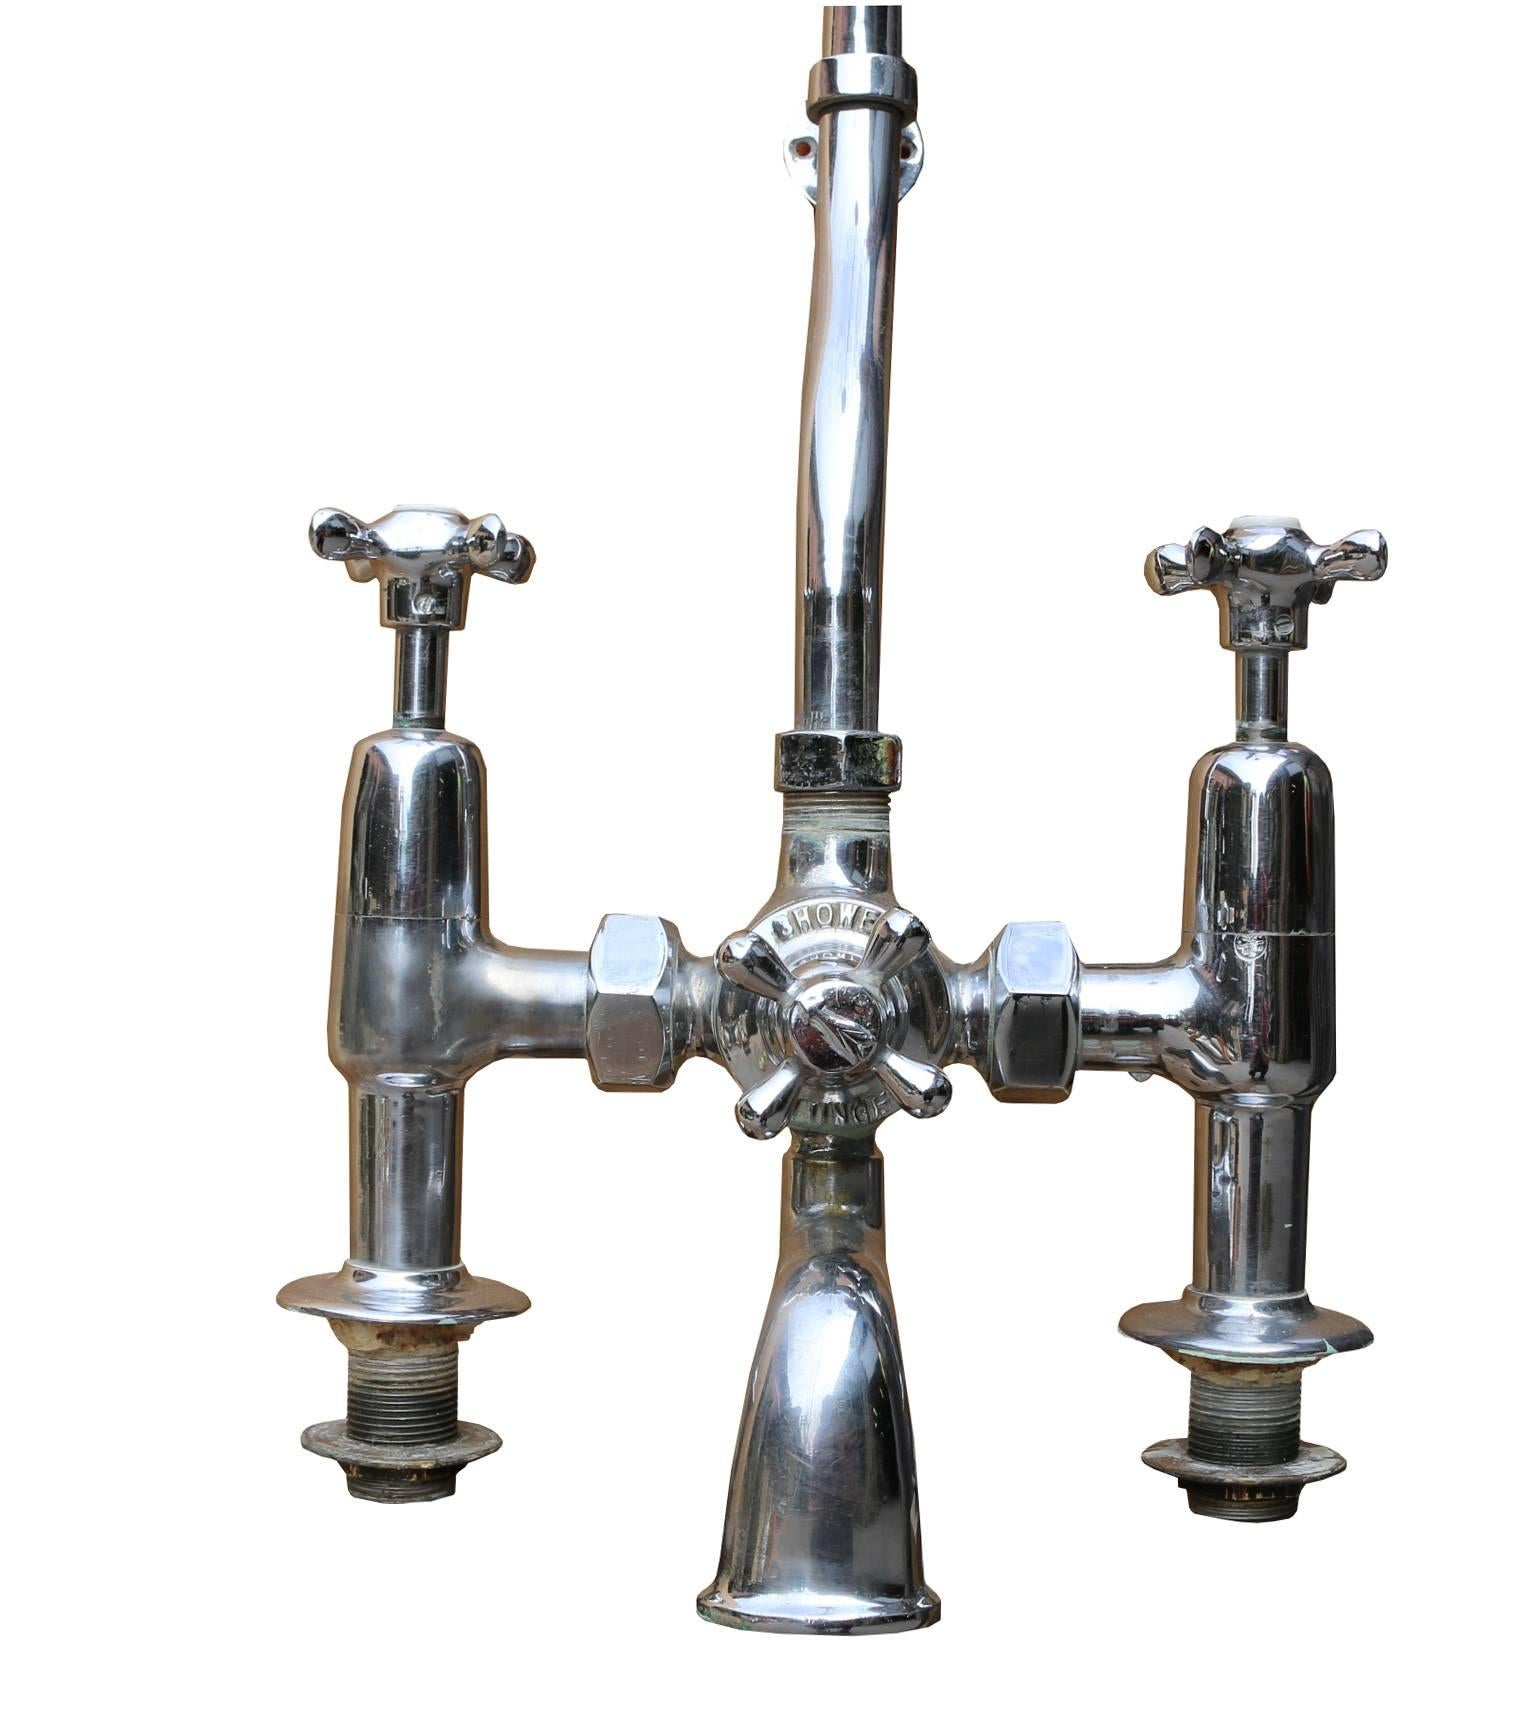 This set is in good condition. The taps have not been tested but have come straight from a working bathroom and the chrome is in reasonable condition.
Measure: Total height from the base of the taps to the top 175 cm
Tap height 23.5 cm
Shower